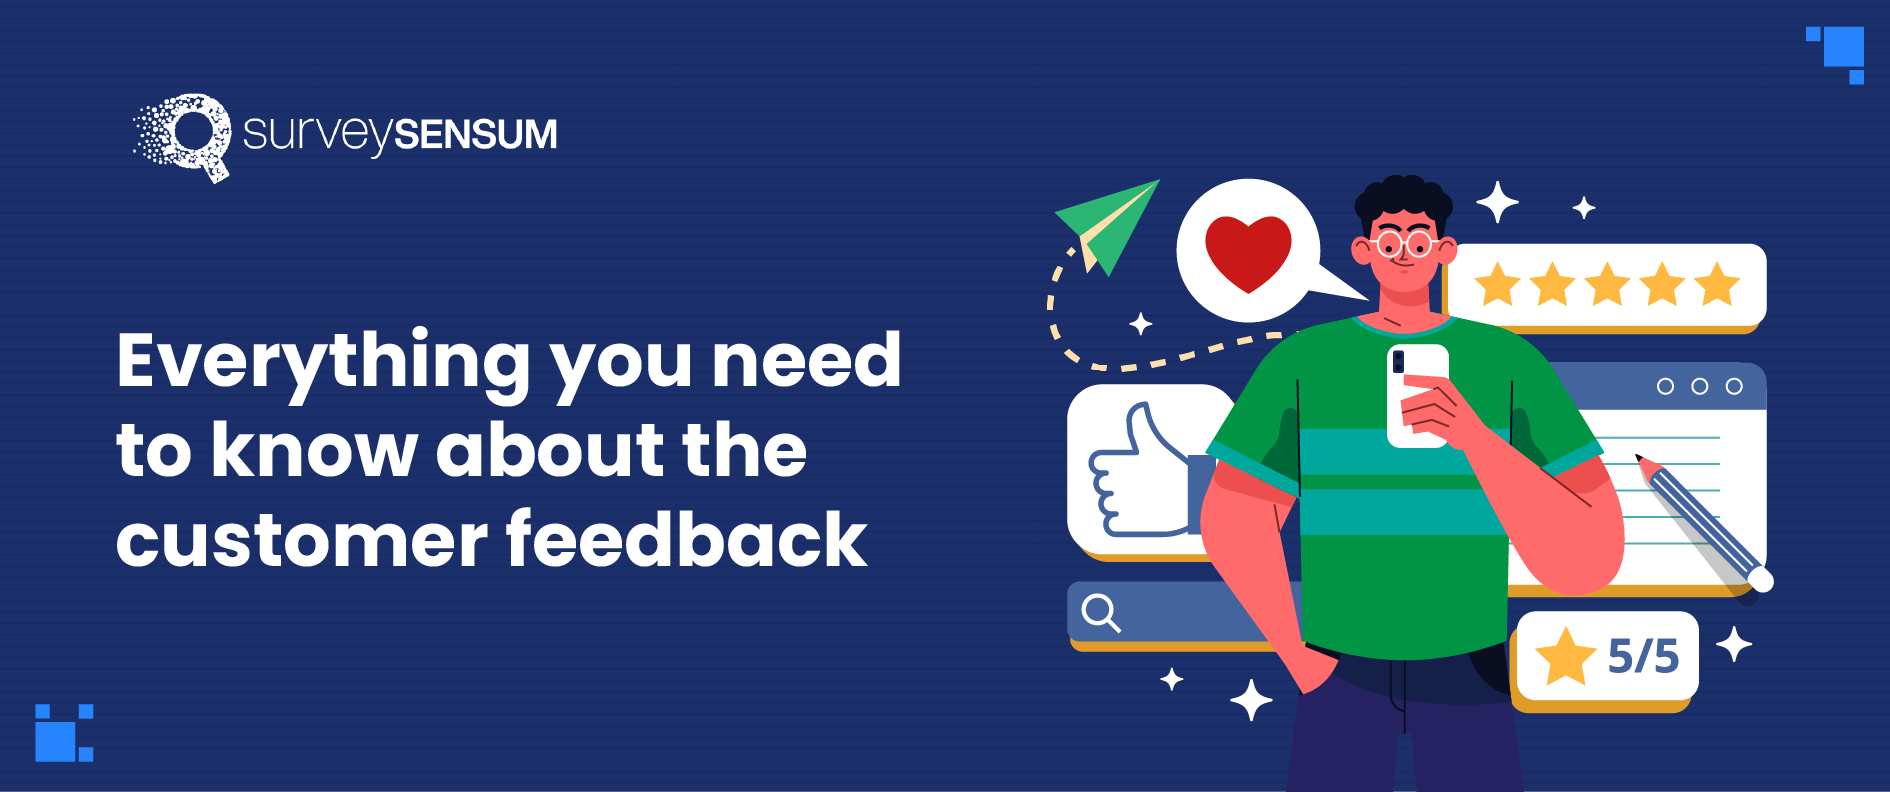 banner image of everything you need to know about customer feedback